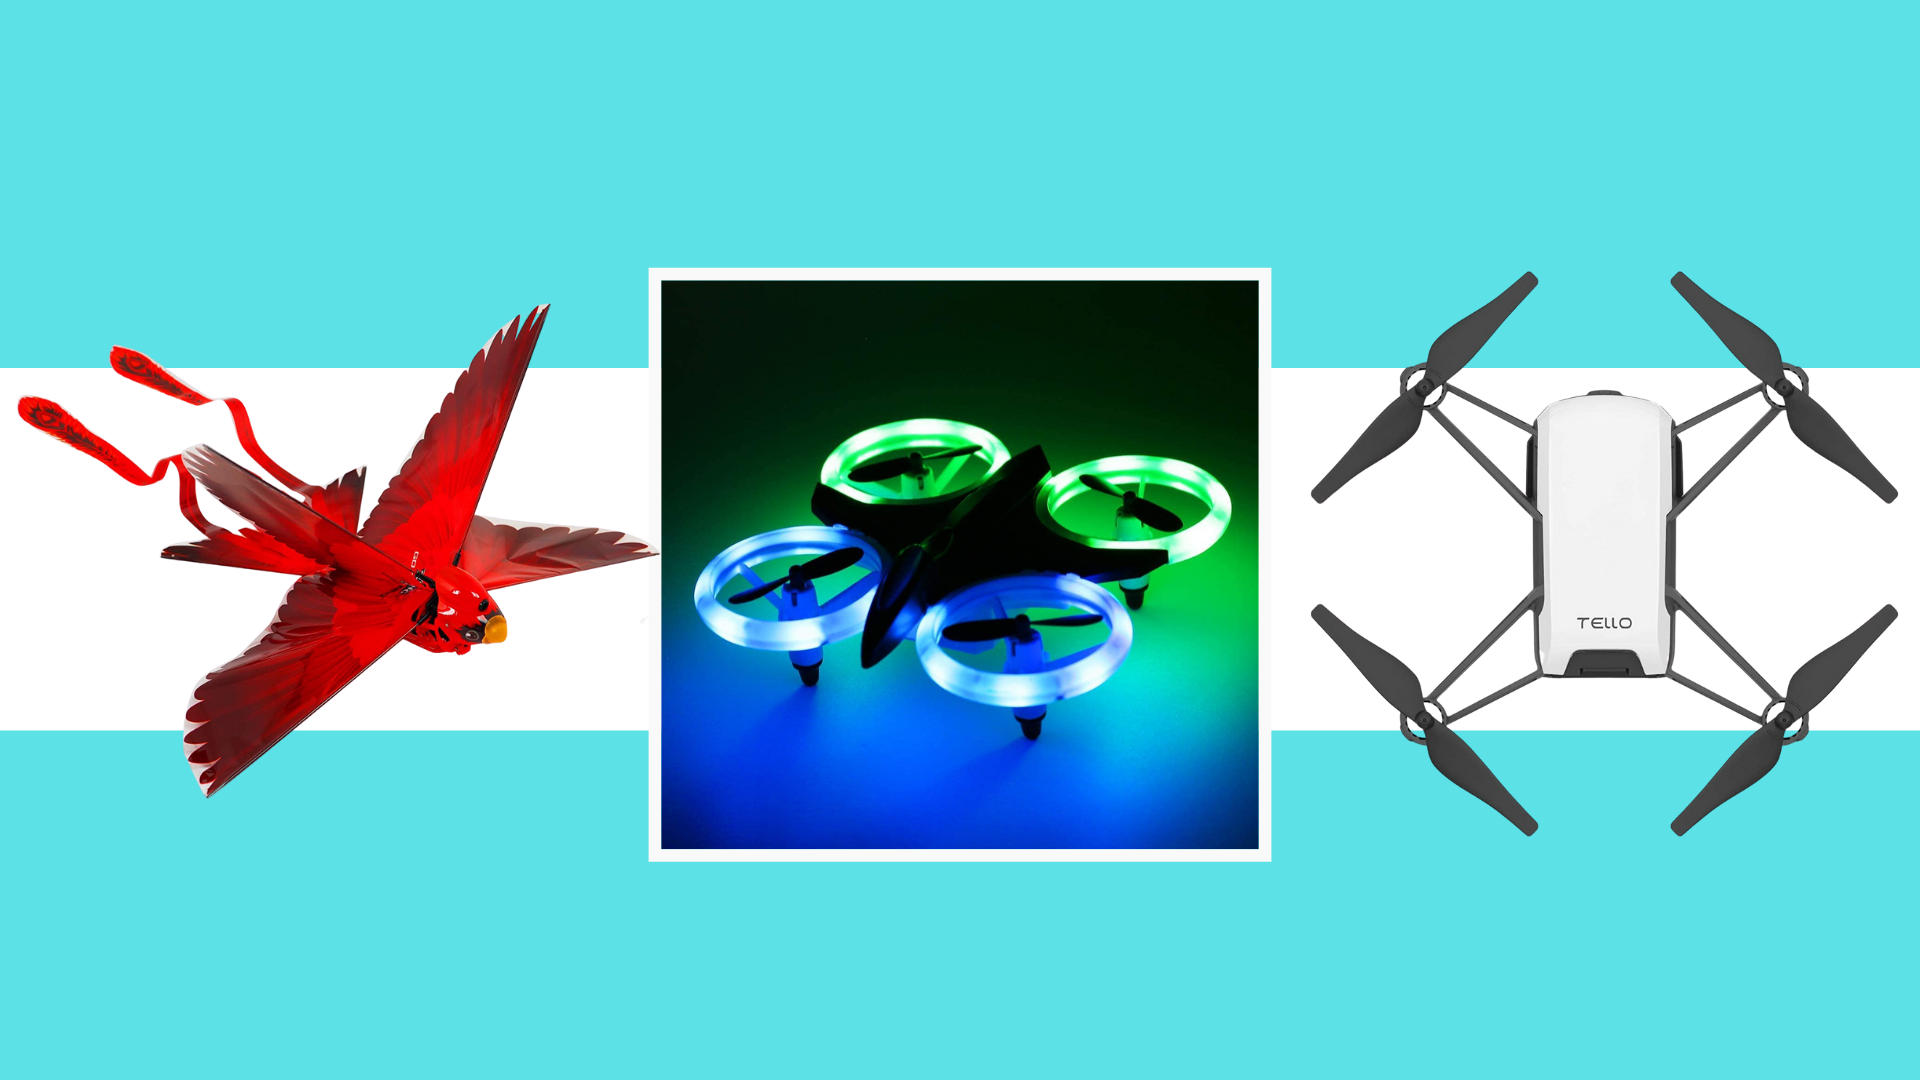 New Drones for Kids/ Mini Drone/ Boy Toys Age 8-10 Years Old/ Drones for  Kids 8-12 with Camera/ Coolest Gifts for 10 Year Old Boy